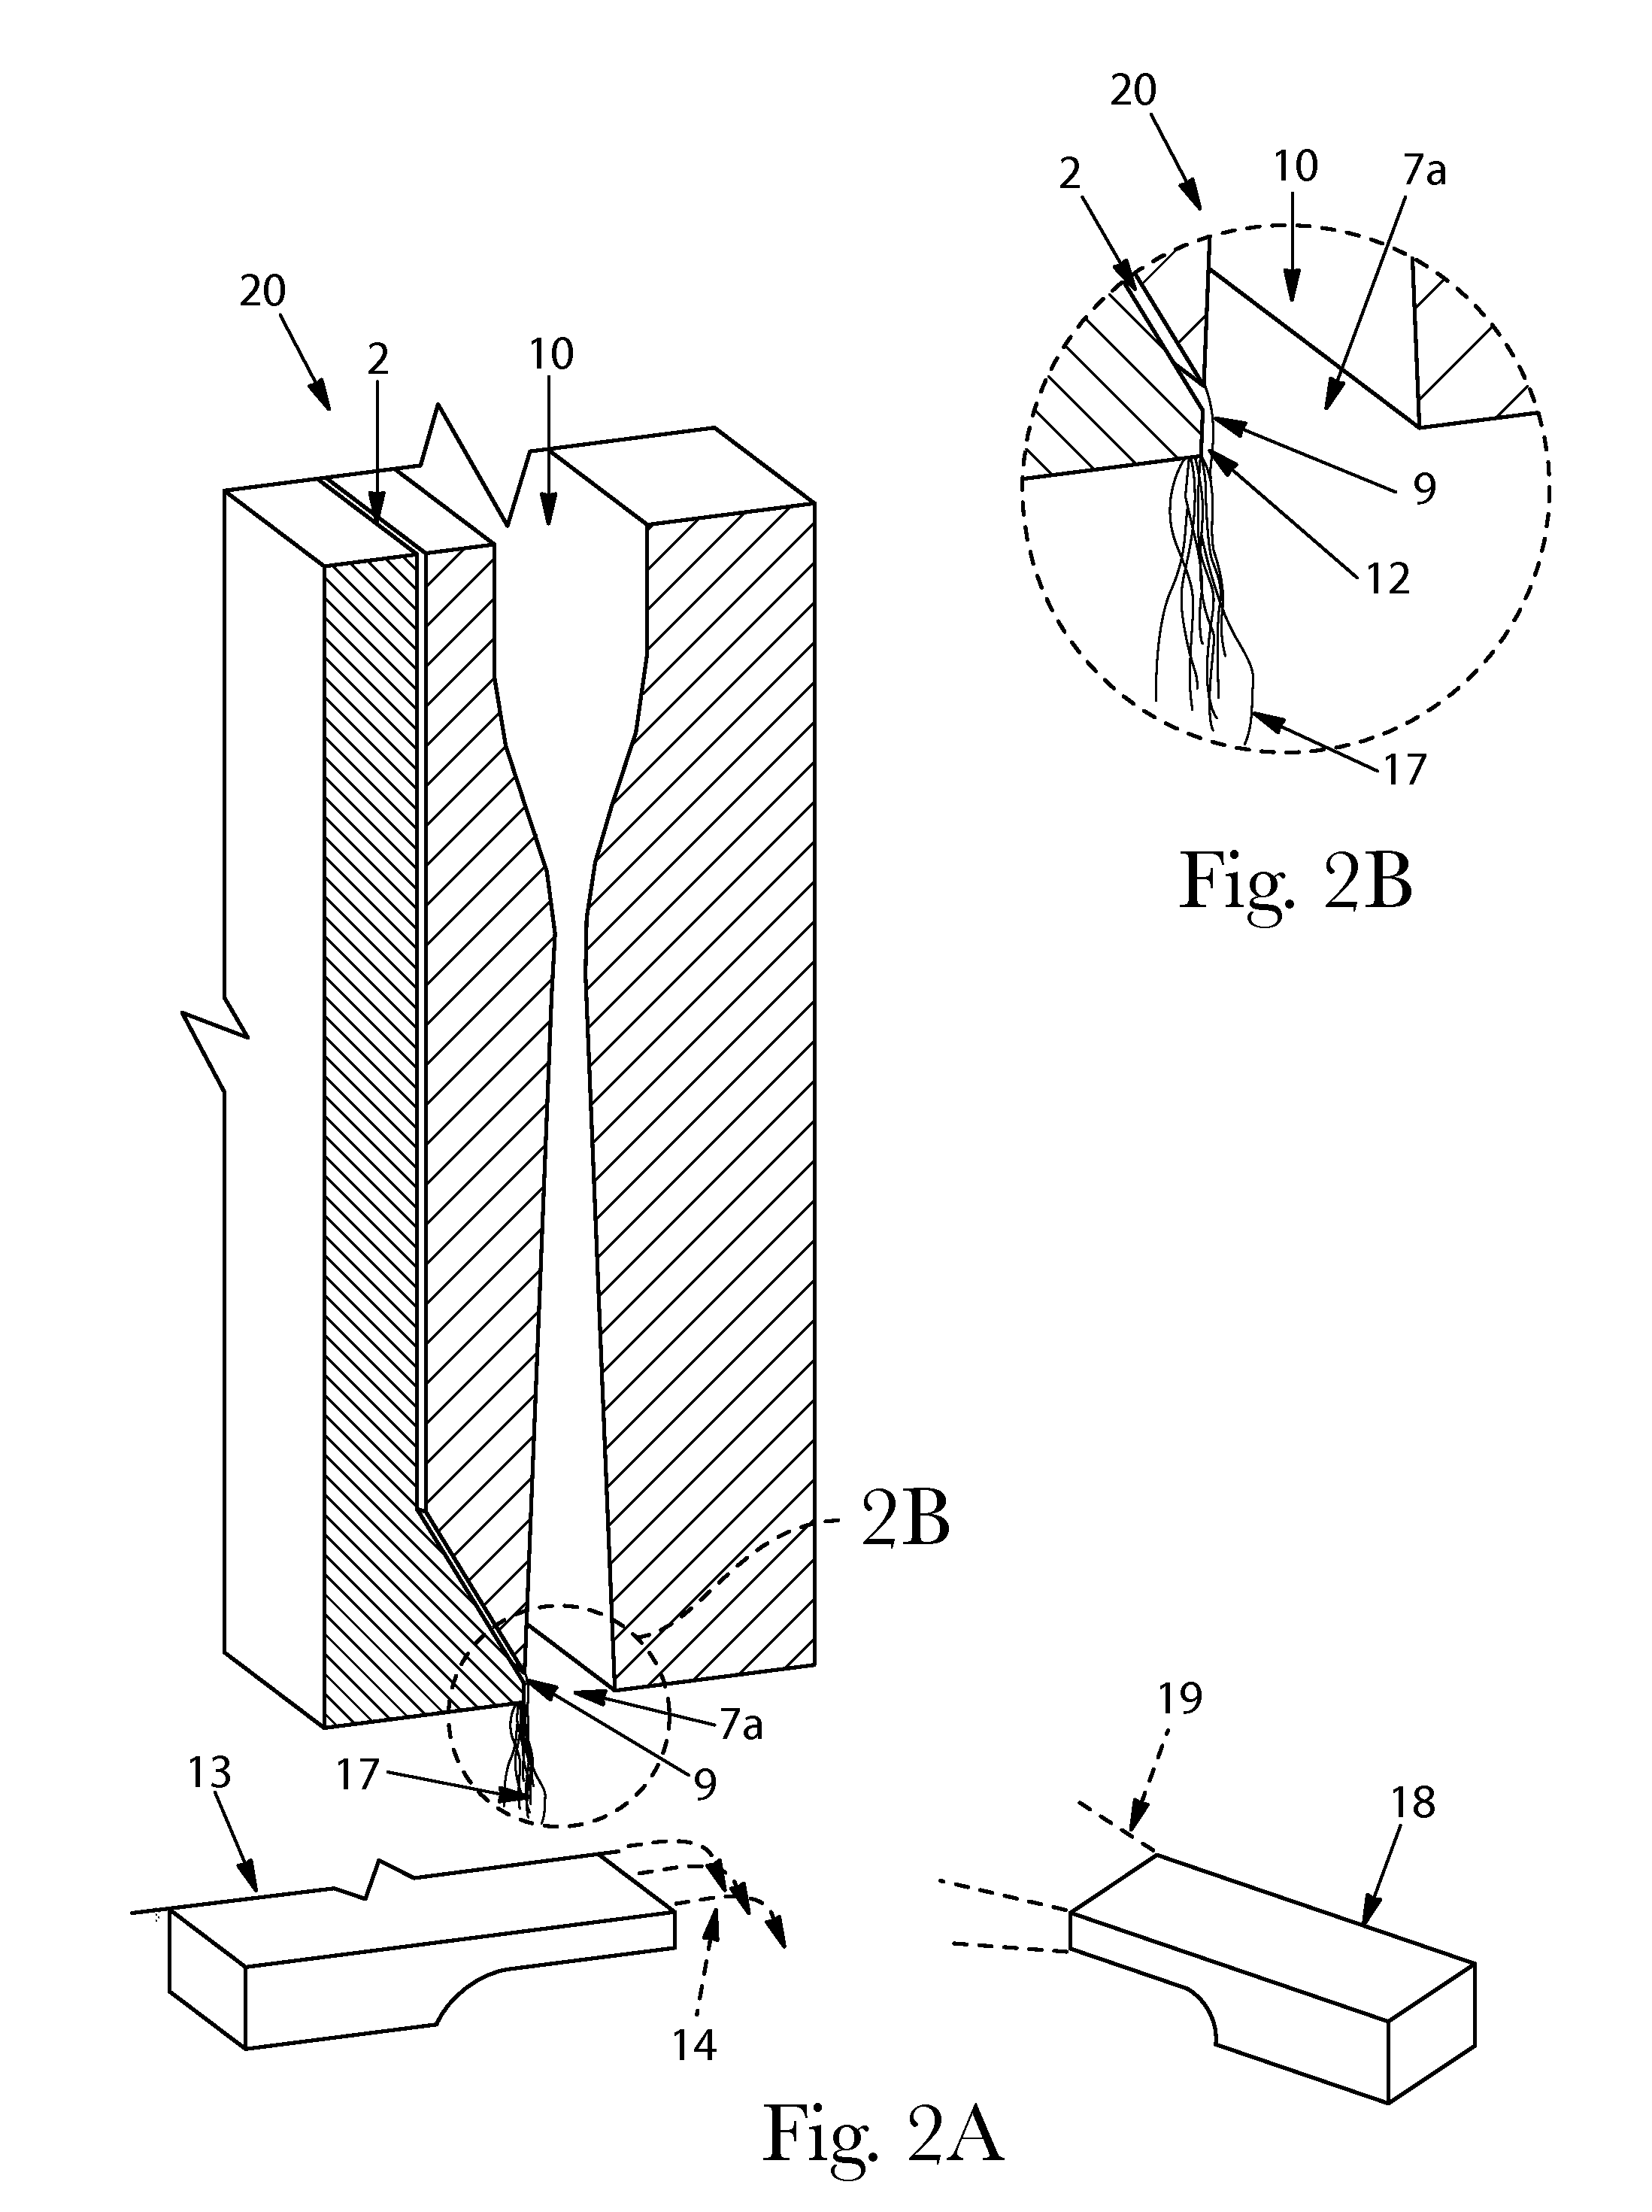 Methods of Delivering a Health Care Active by Administering Personal Health Care Articles Comprising a Filament